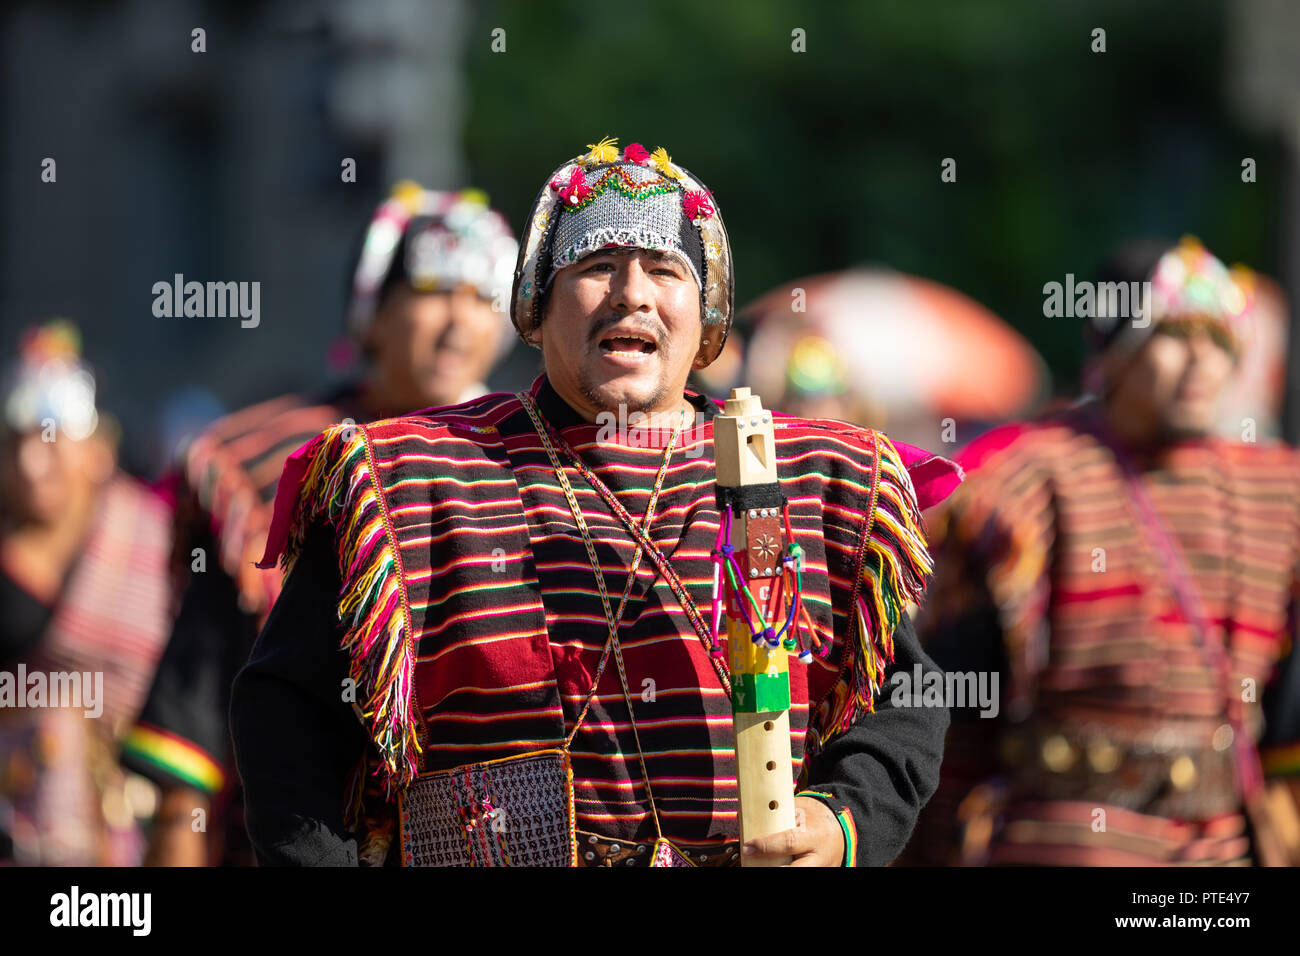 Washington, D.C., USA - September 29, 2018: The Fiesta DC Parade, Bolivian men wearing traditional clothing playing the Tarka, indigenous andes flute Stock Photo